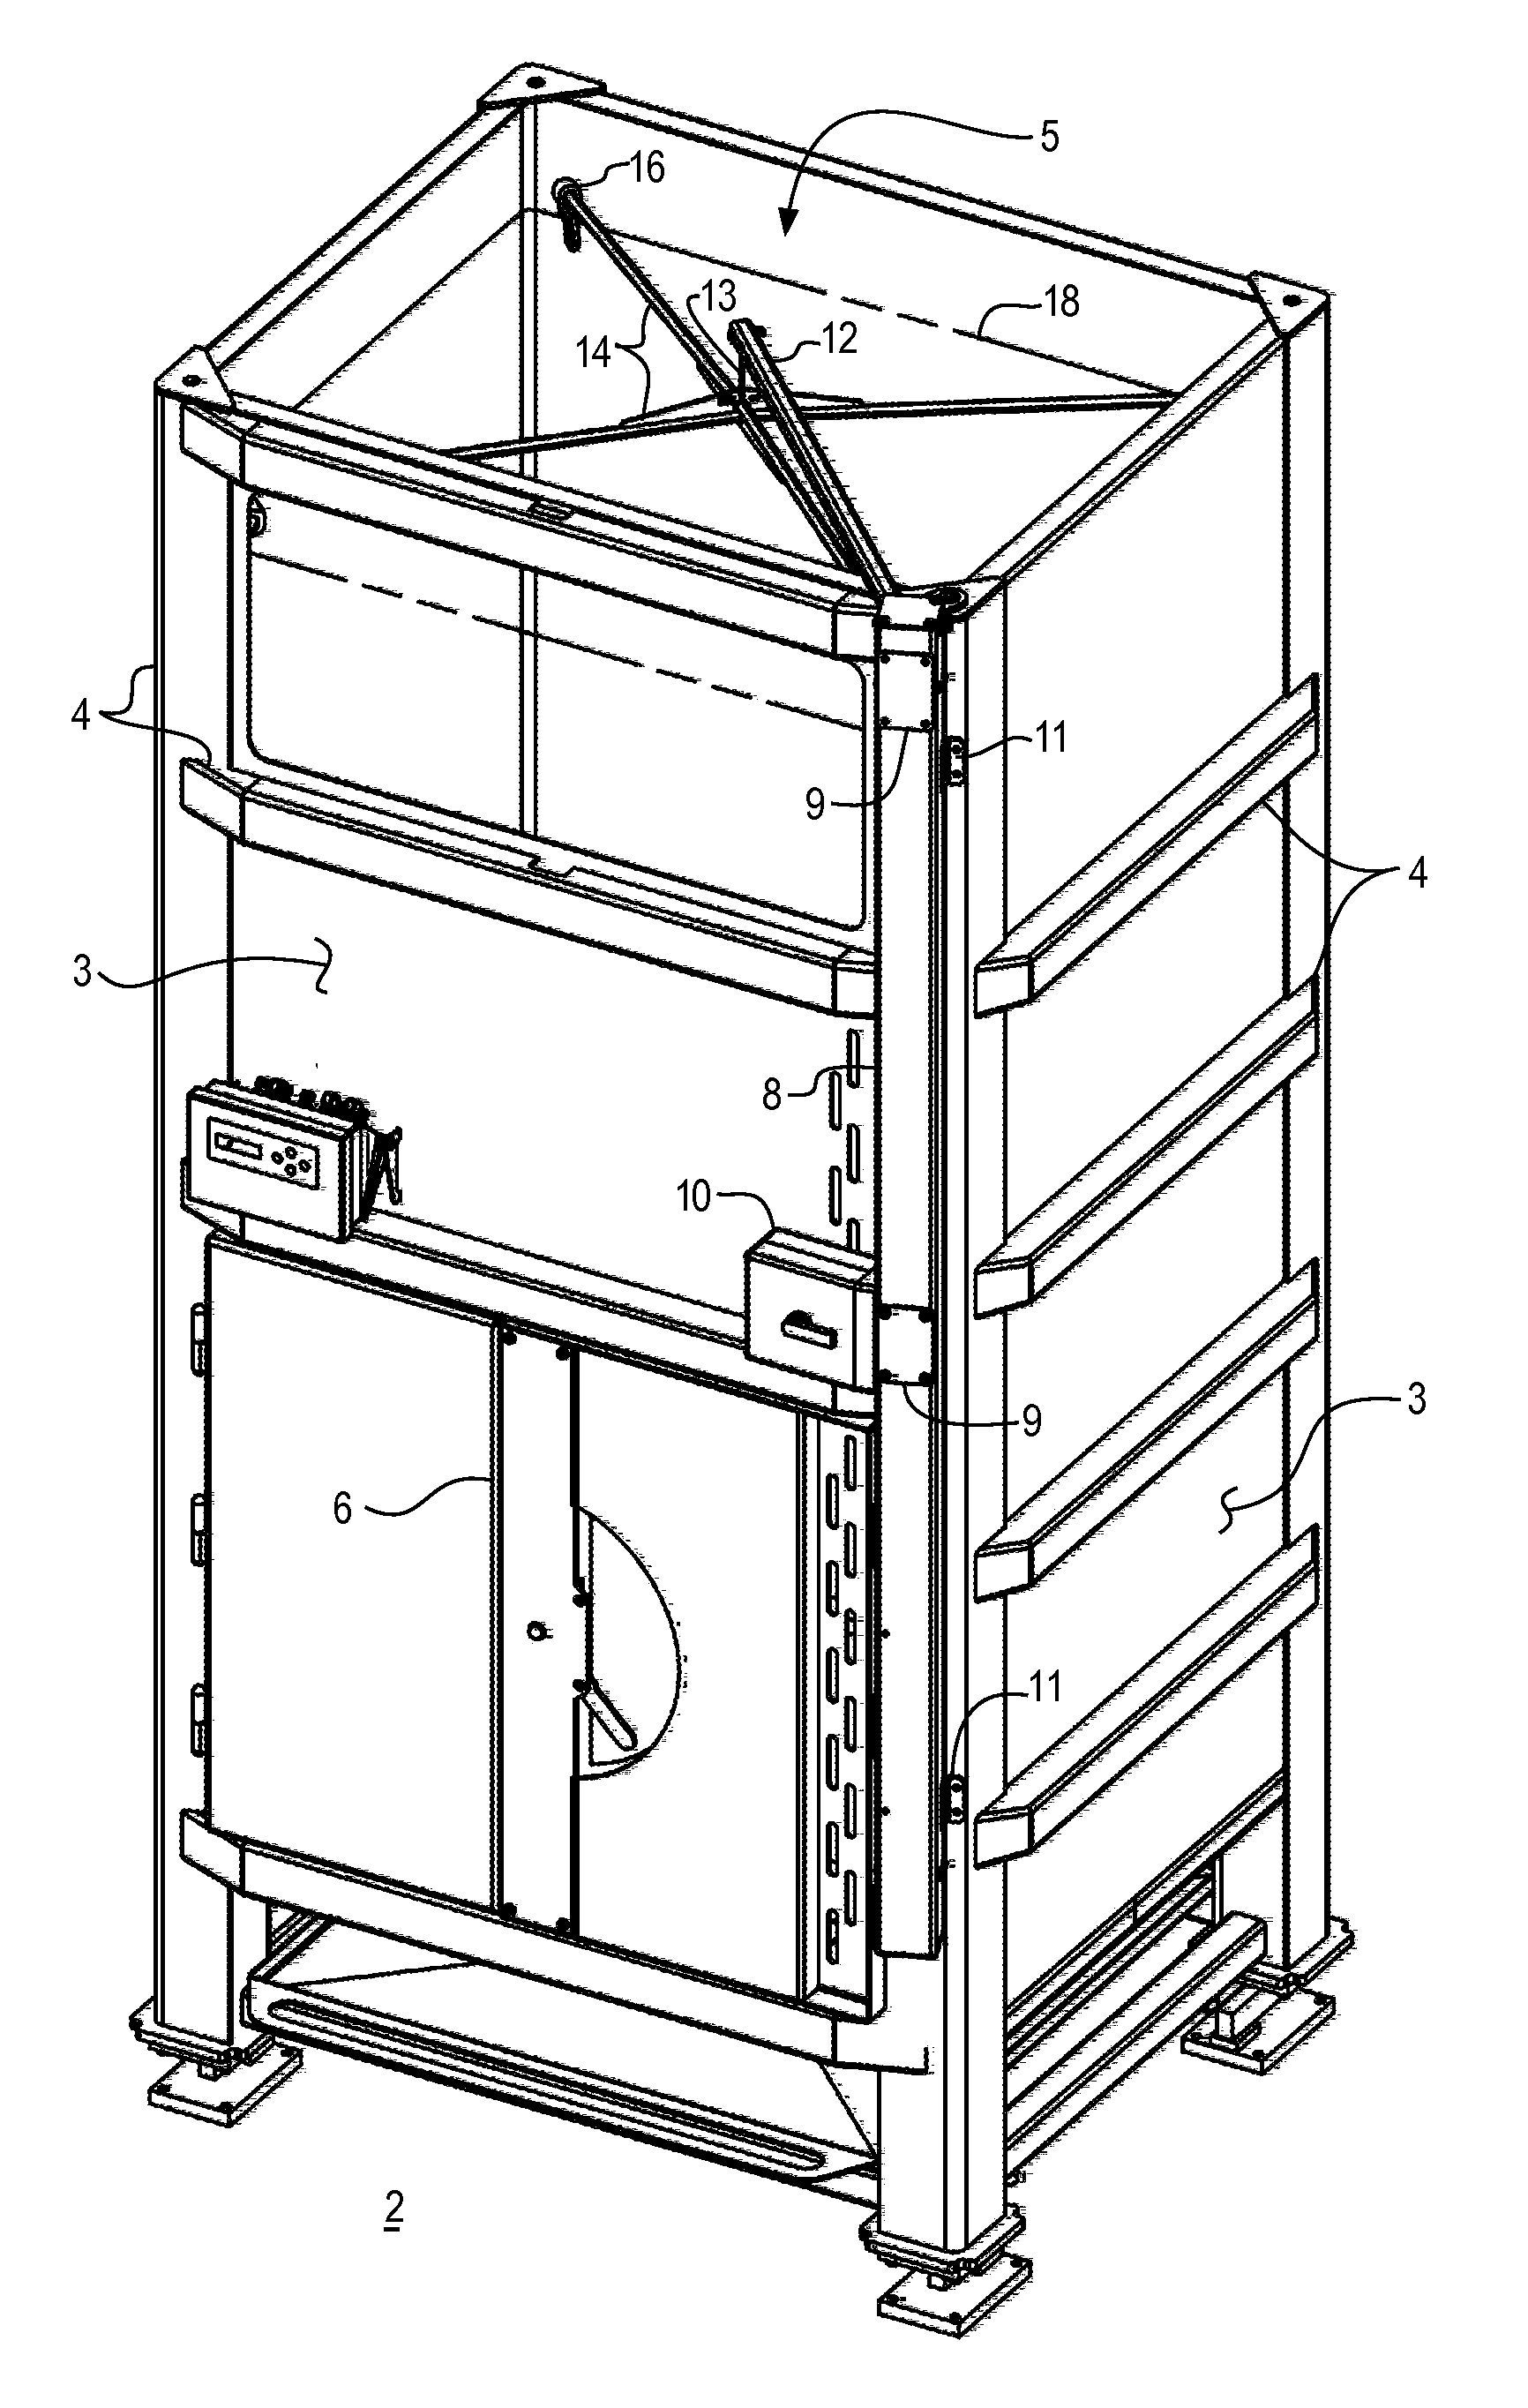 Bag Lift Assembly for a Lined Bulk Material Container